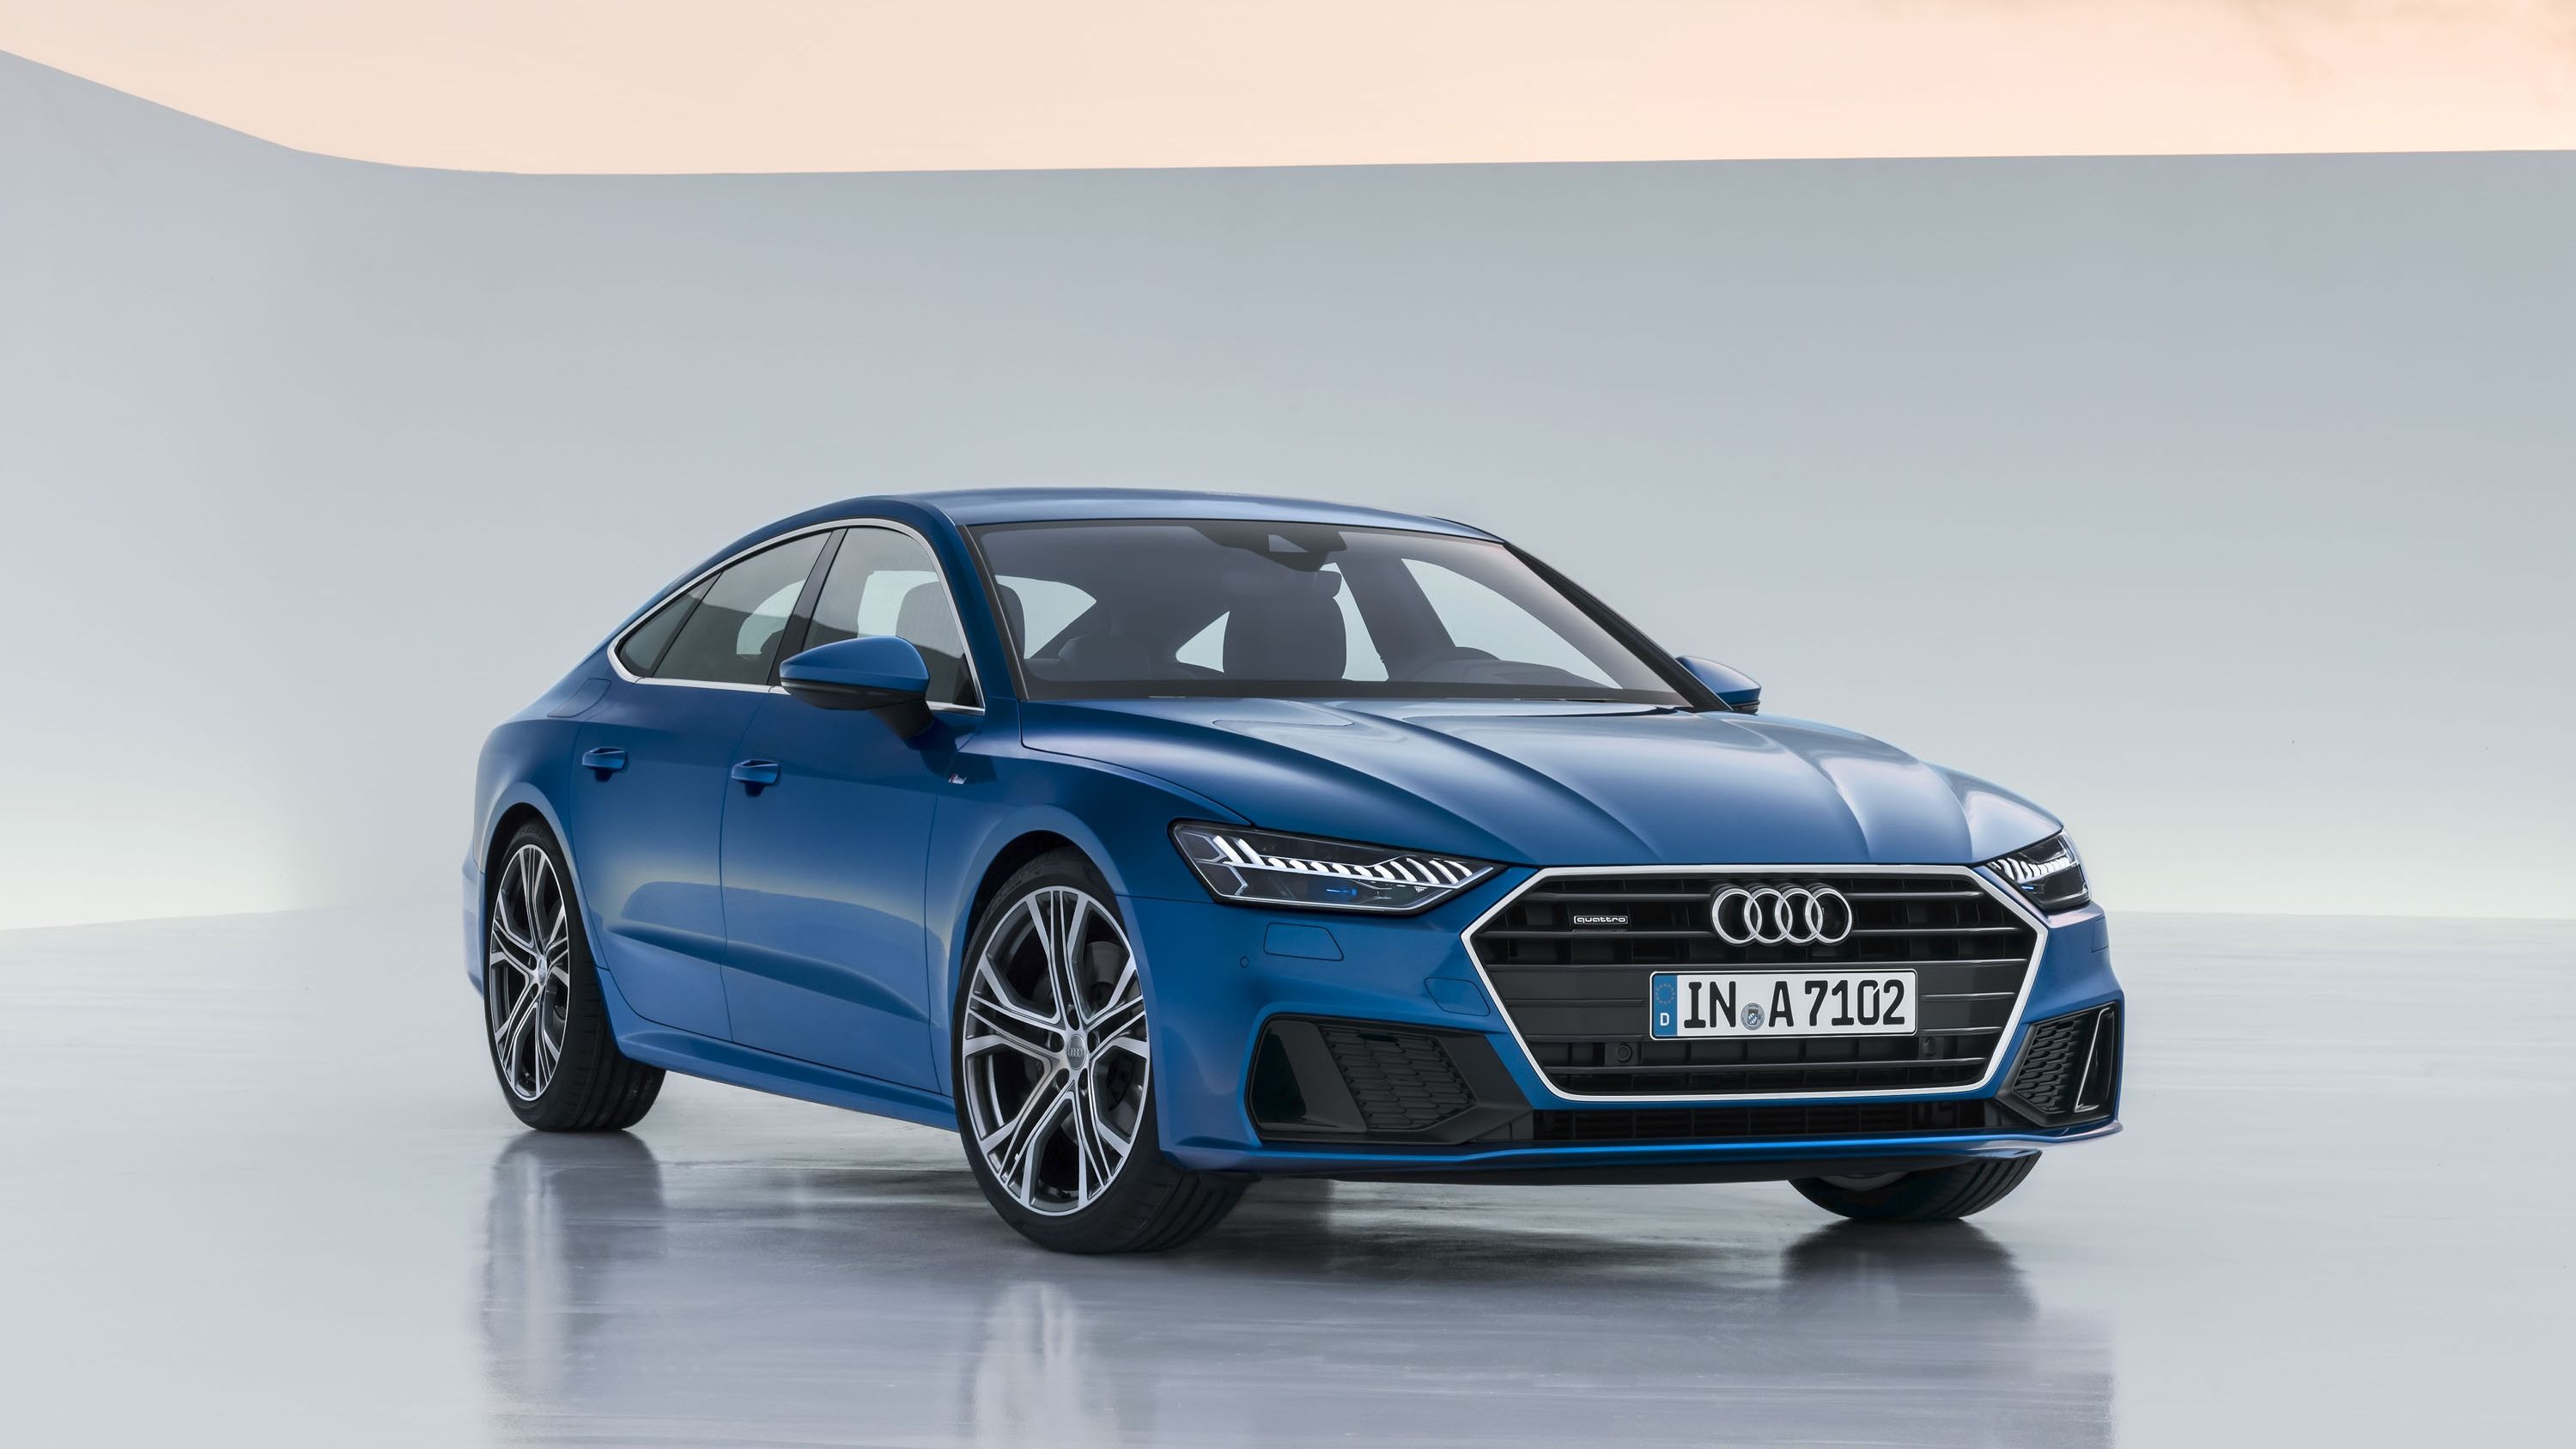 2017 Like Lots of Tech? You Need the Audi A7 in your Life